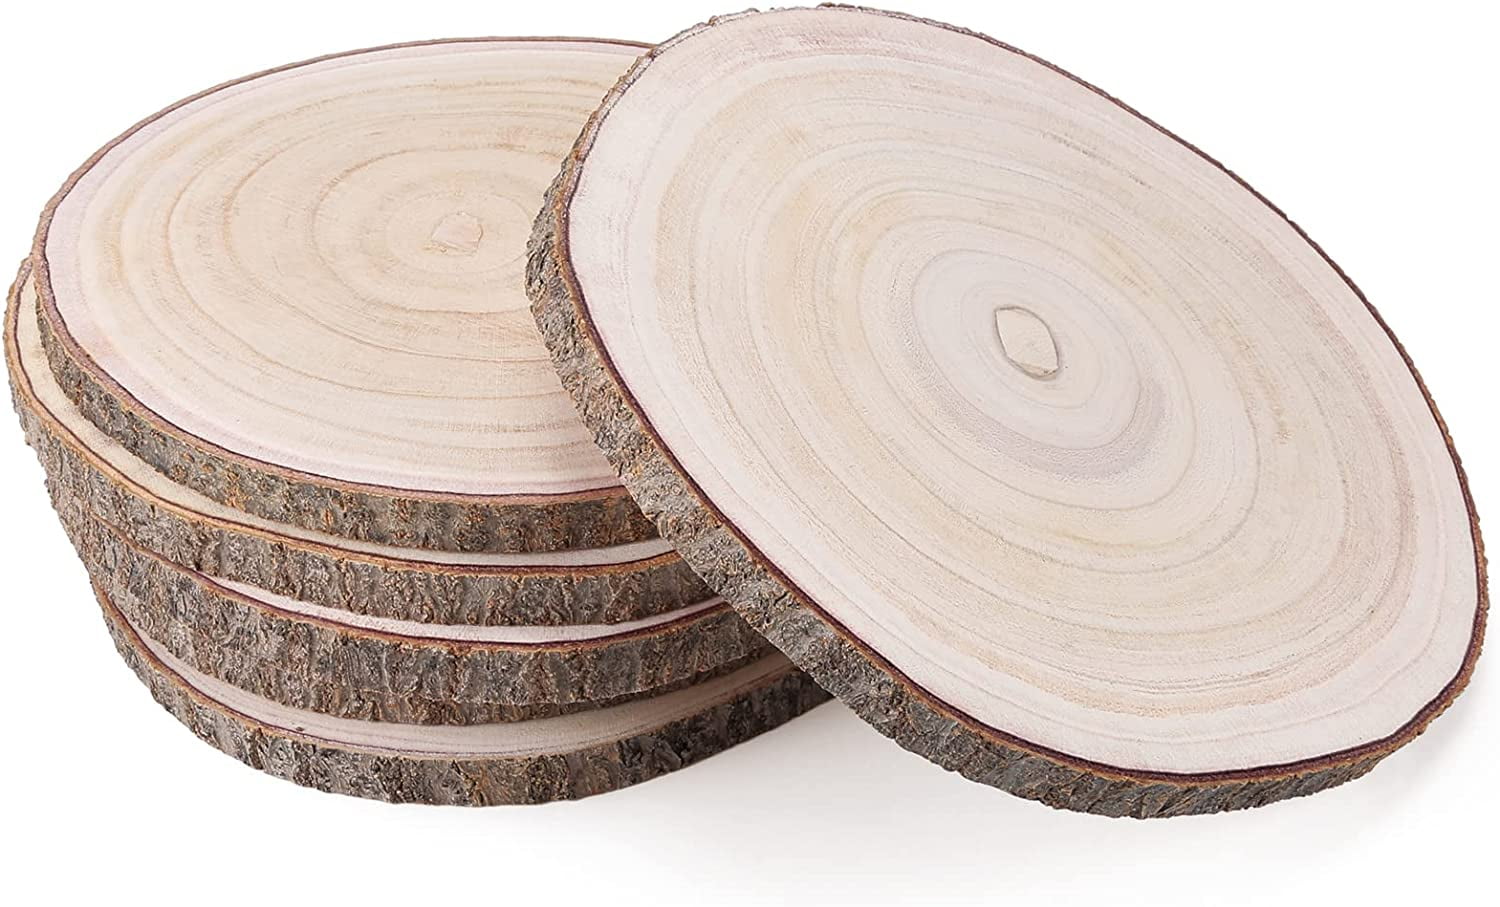 Pllieay 8Pcs 8-9 Inch Wood Slices, Natural Wood Slices for Centerpieces  Large Unfinished Round Wood Pieces for Ornaments, Wood Circles for Wedding